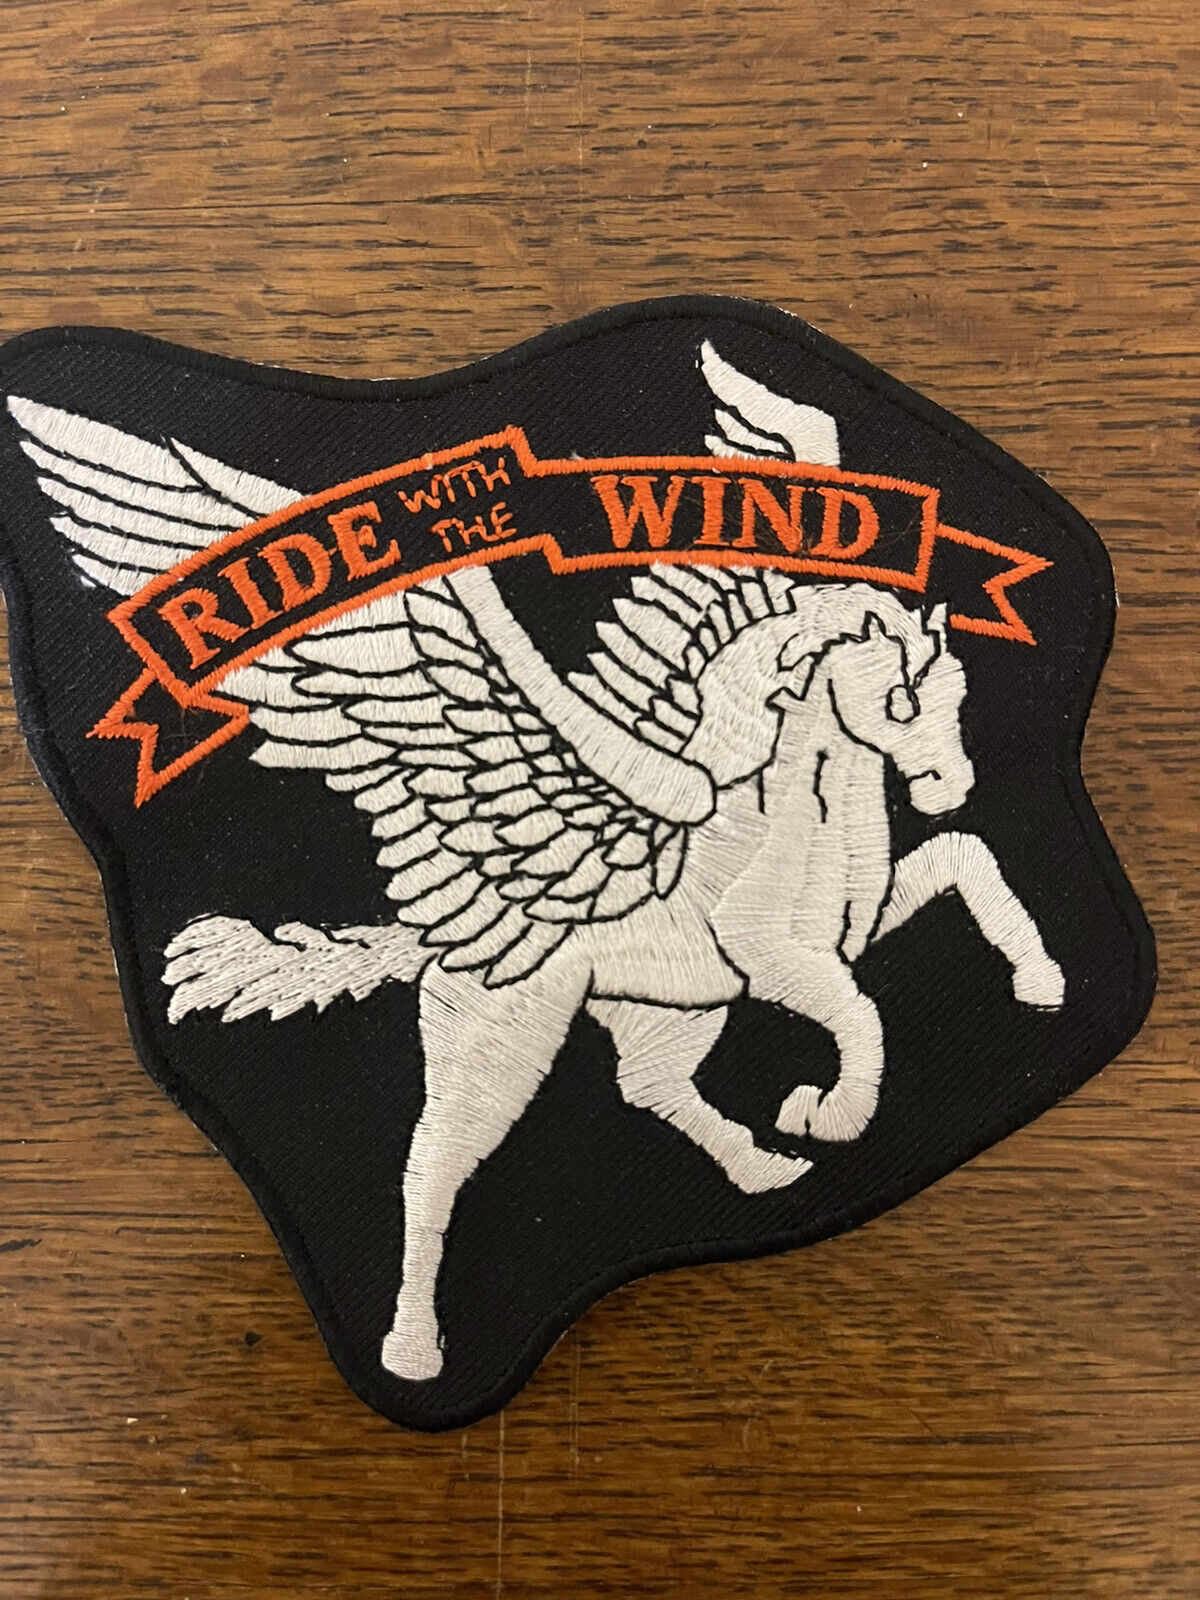 1 New Biker Back Patch MotorCycle Ride The Wind Pegasus 5” Iron Or Sew On Jacket